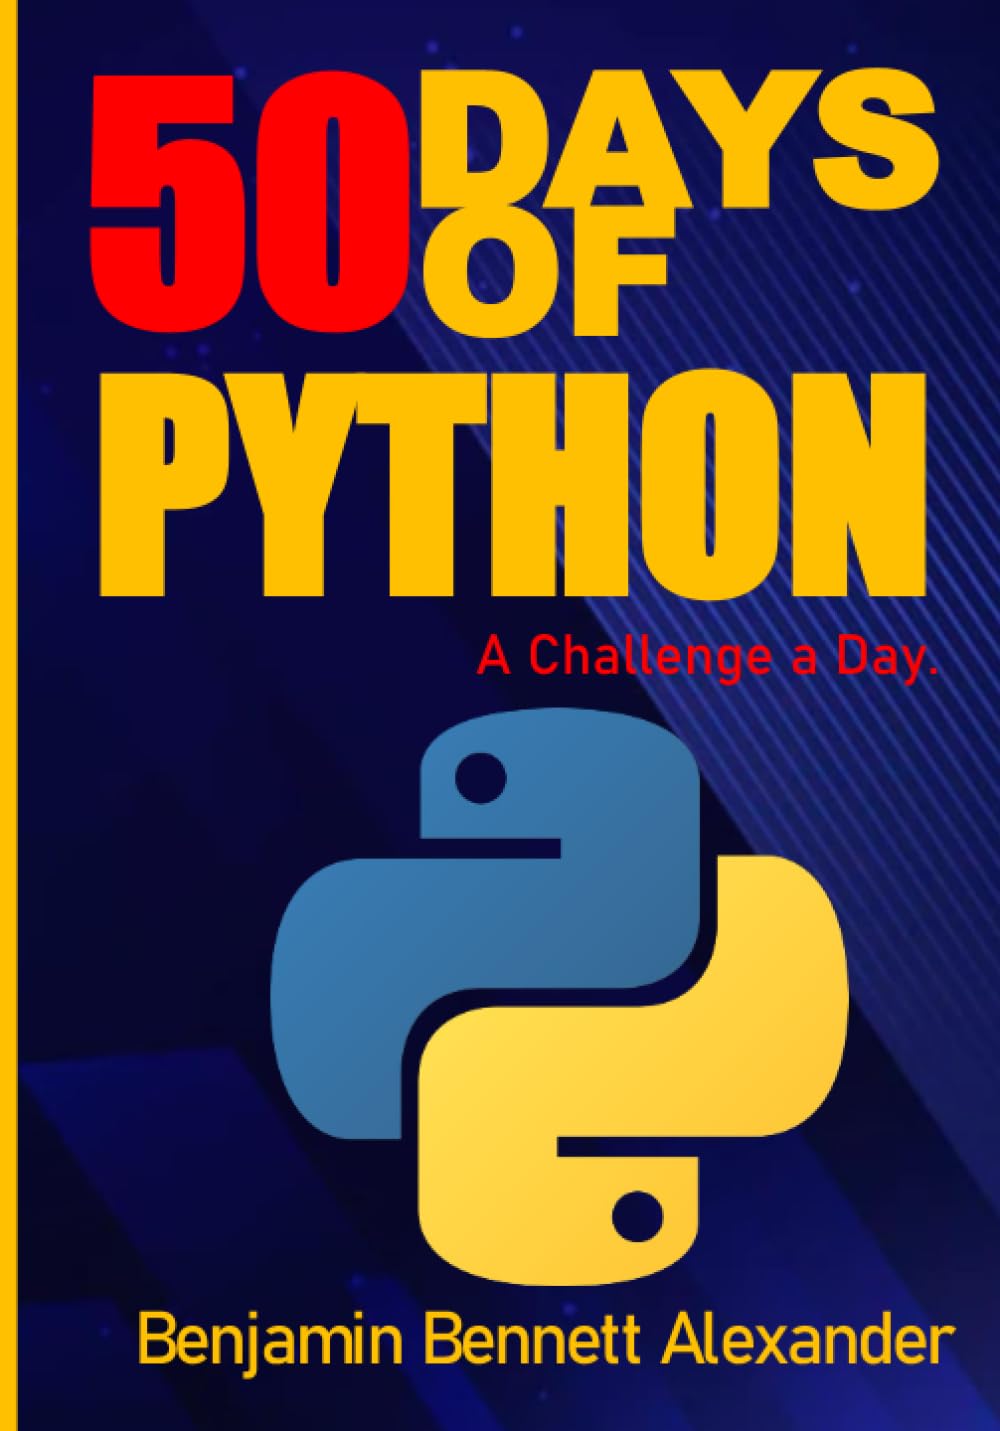 50 Days of Python : A Challenge a Day.: The Ultimate Challenges Book for Python Beginners